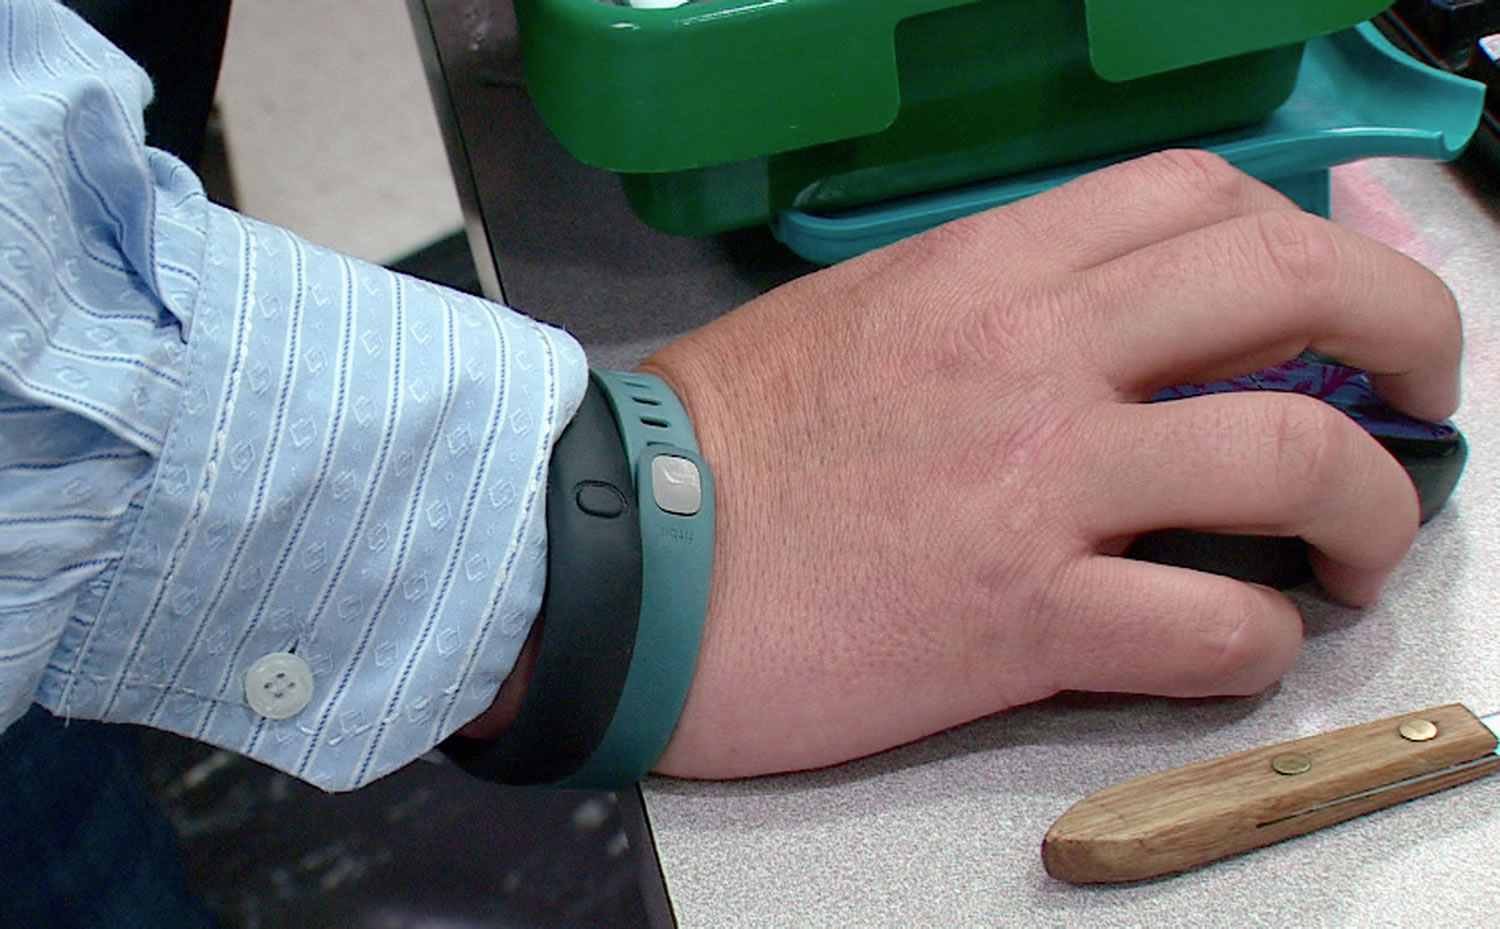 Tim Davis of Beaver, Pa., wears his FitBit and Nike FuelBand.